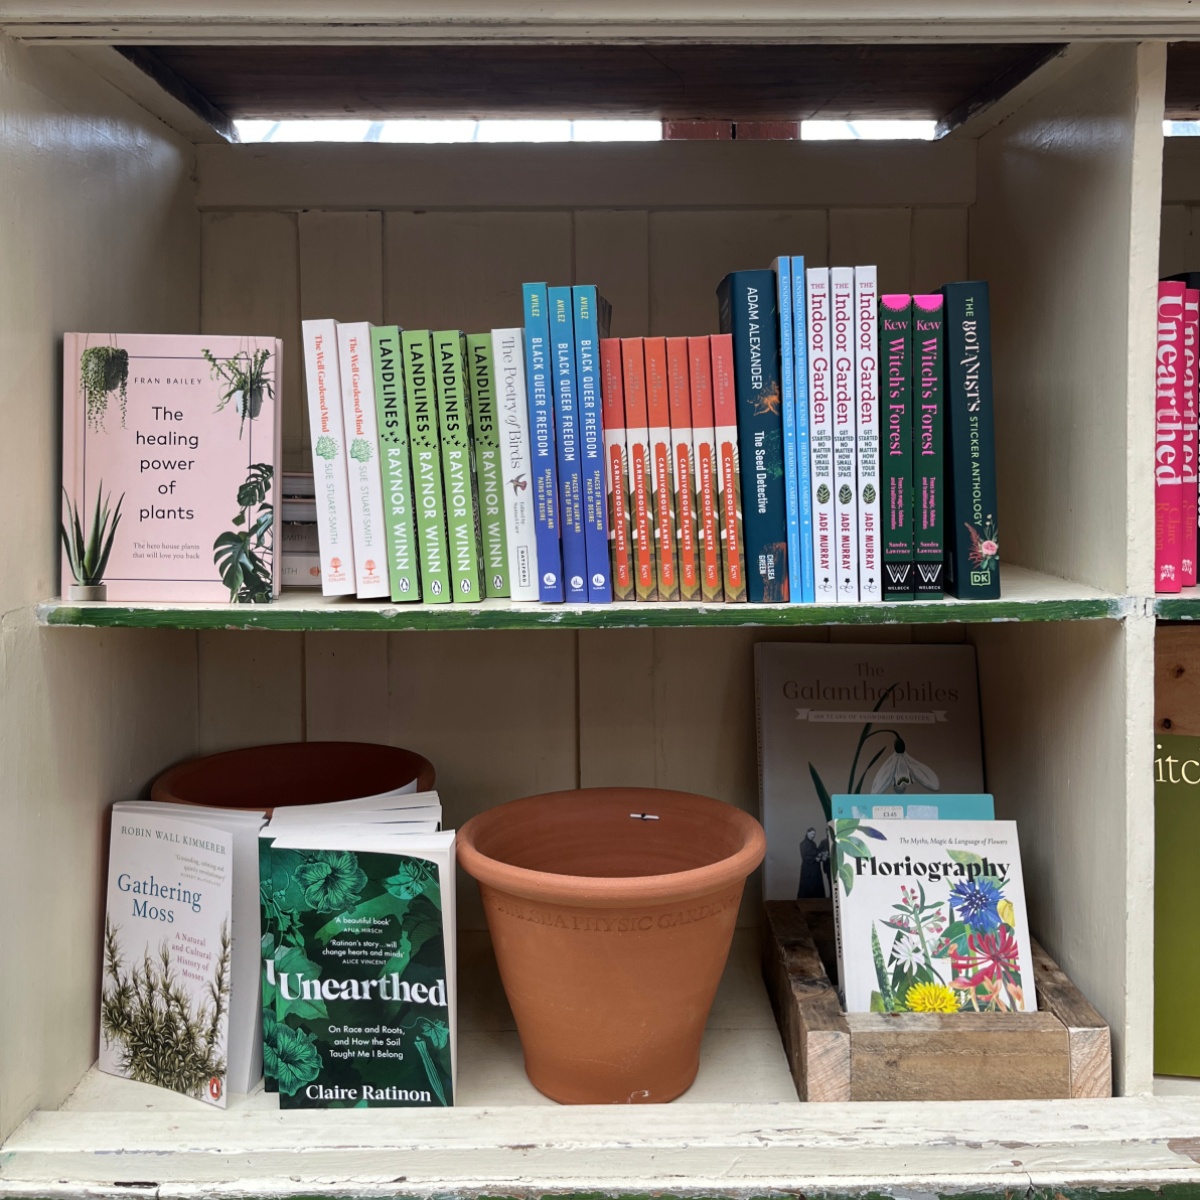 It's World Book Day today and our Shop has lots of books to choose from! We have books about gardening , medicinal plants, garden and horticultural history, women's health and even local history. Pop along to pick one for yourself or a loved one. #WorldBookDay